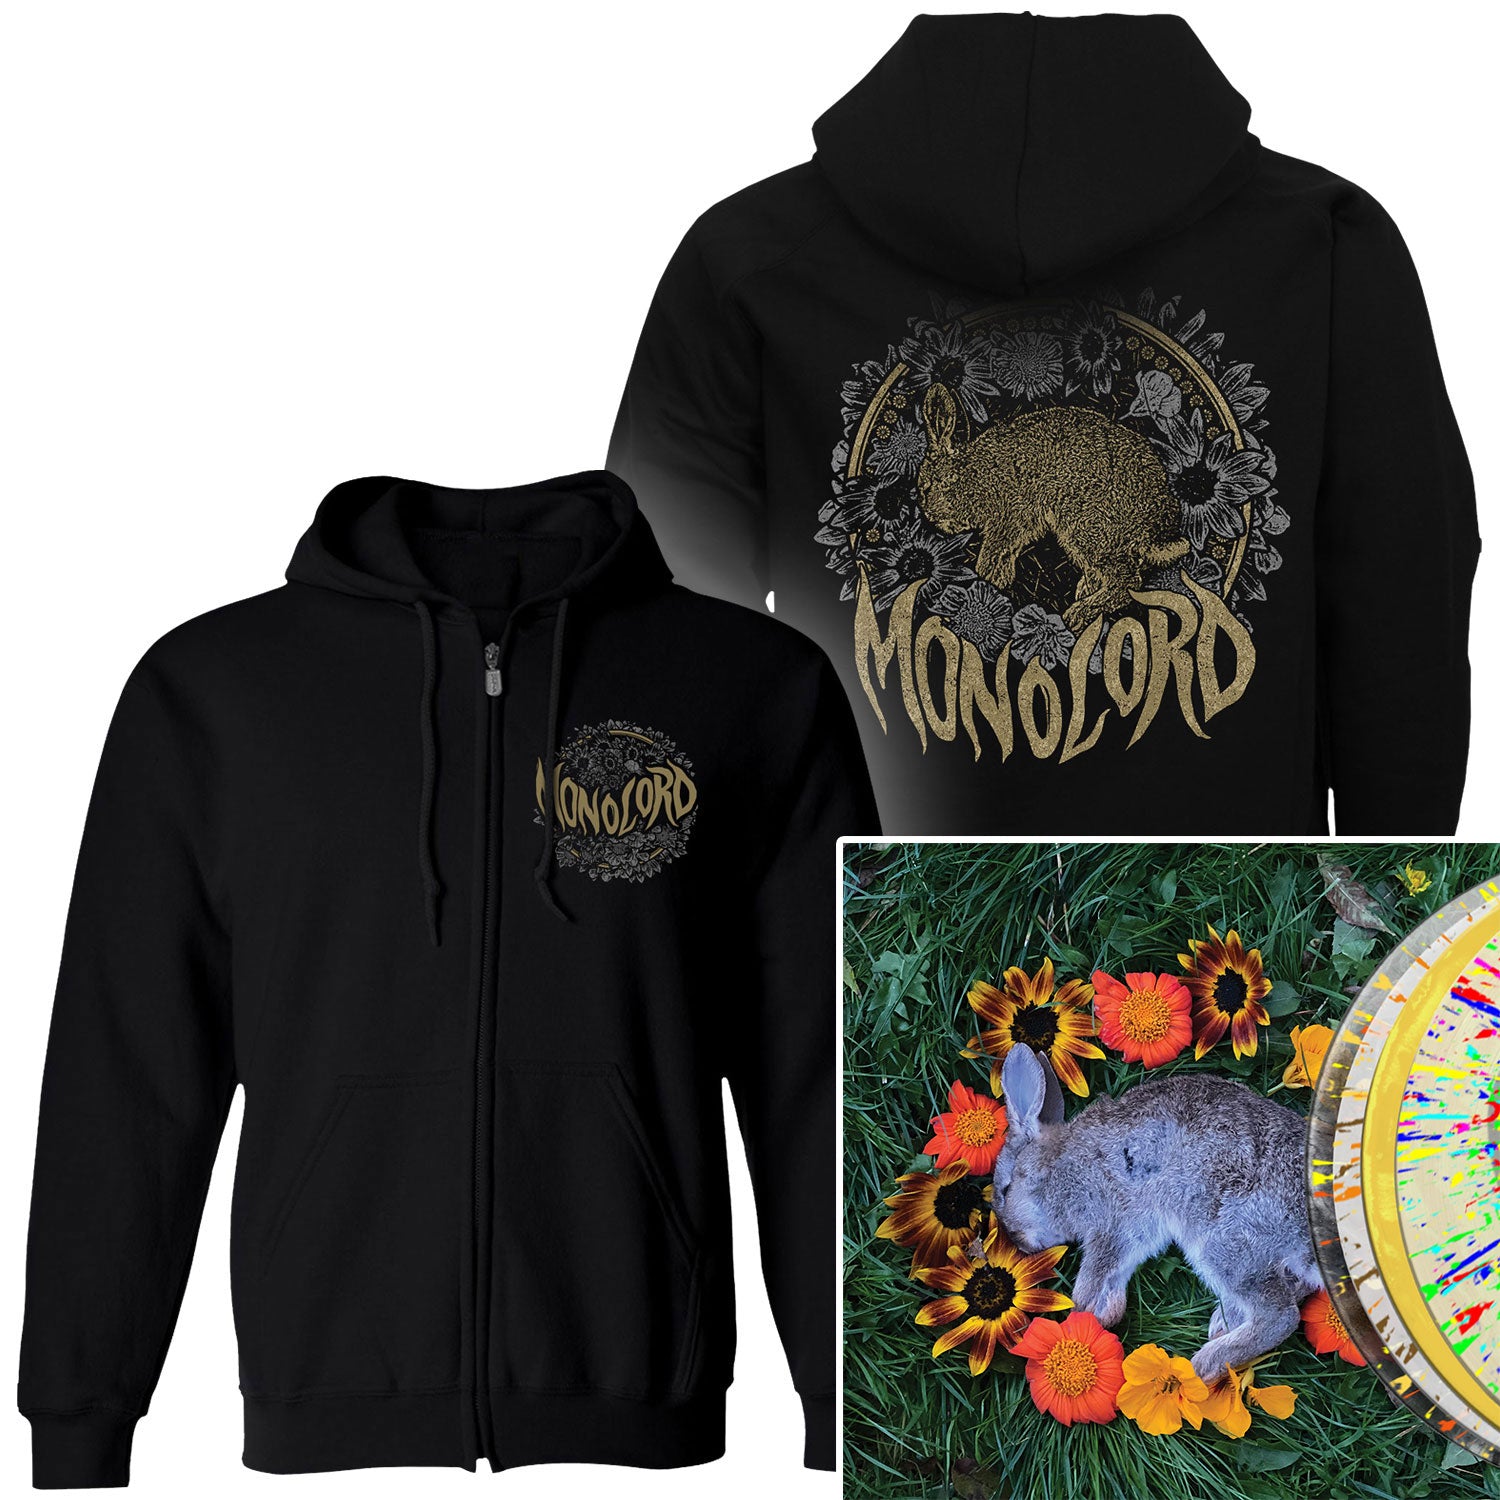 Monolord "Your Time To Shine Zip Up Hoodie + LP Bundle" Bundle